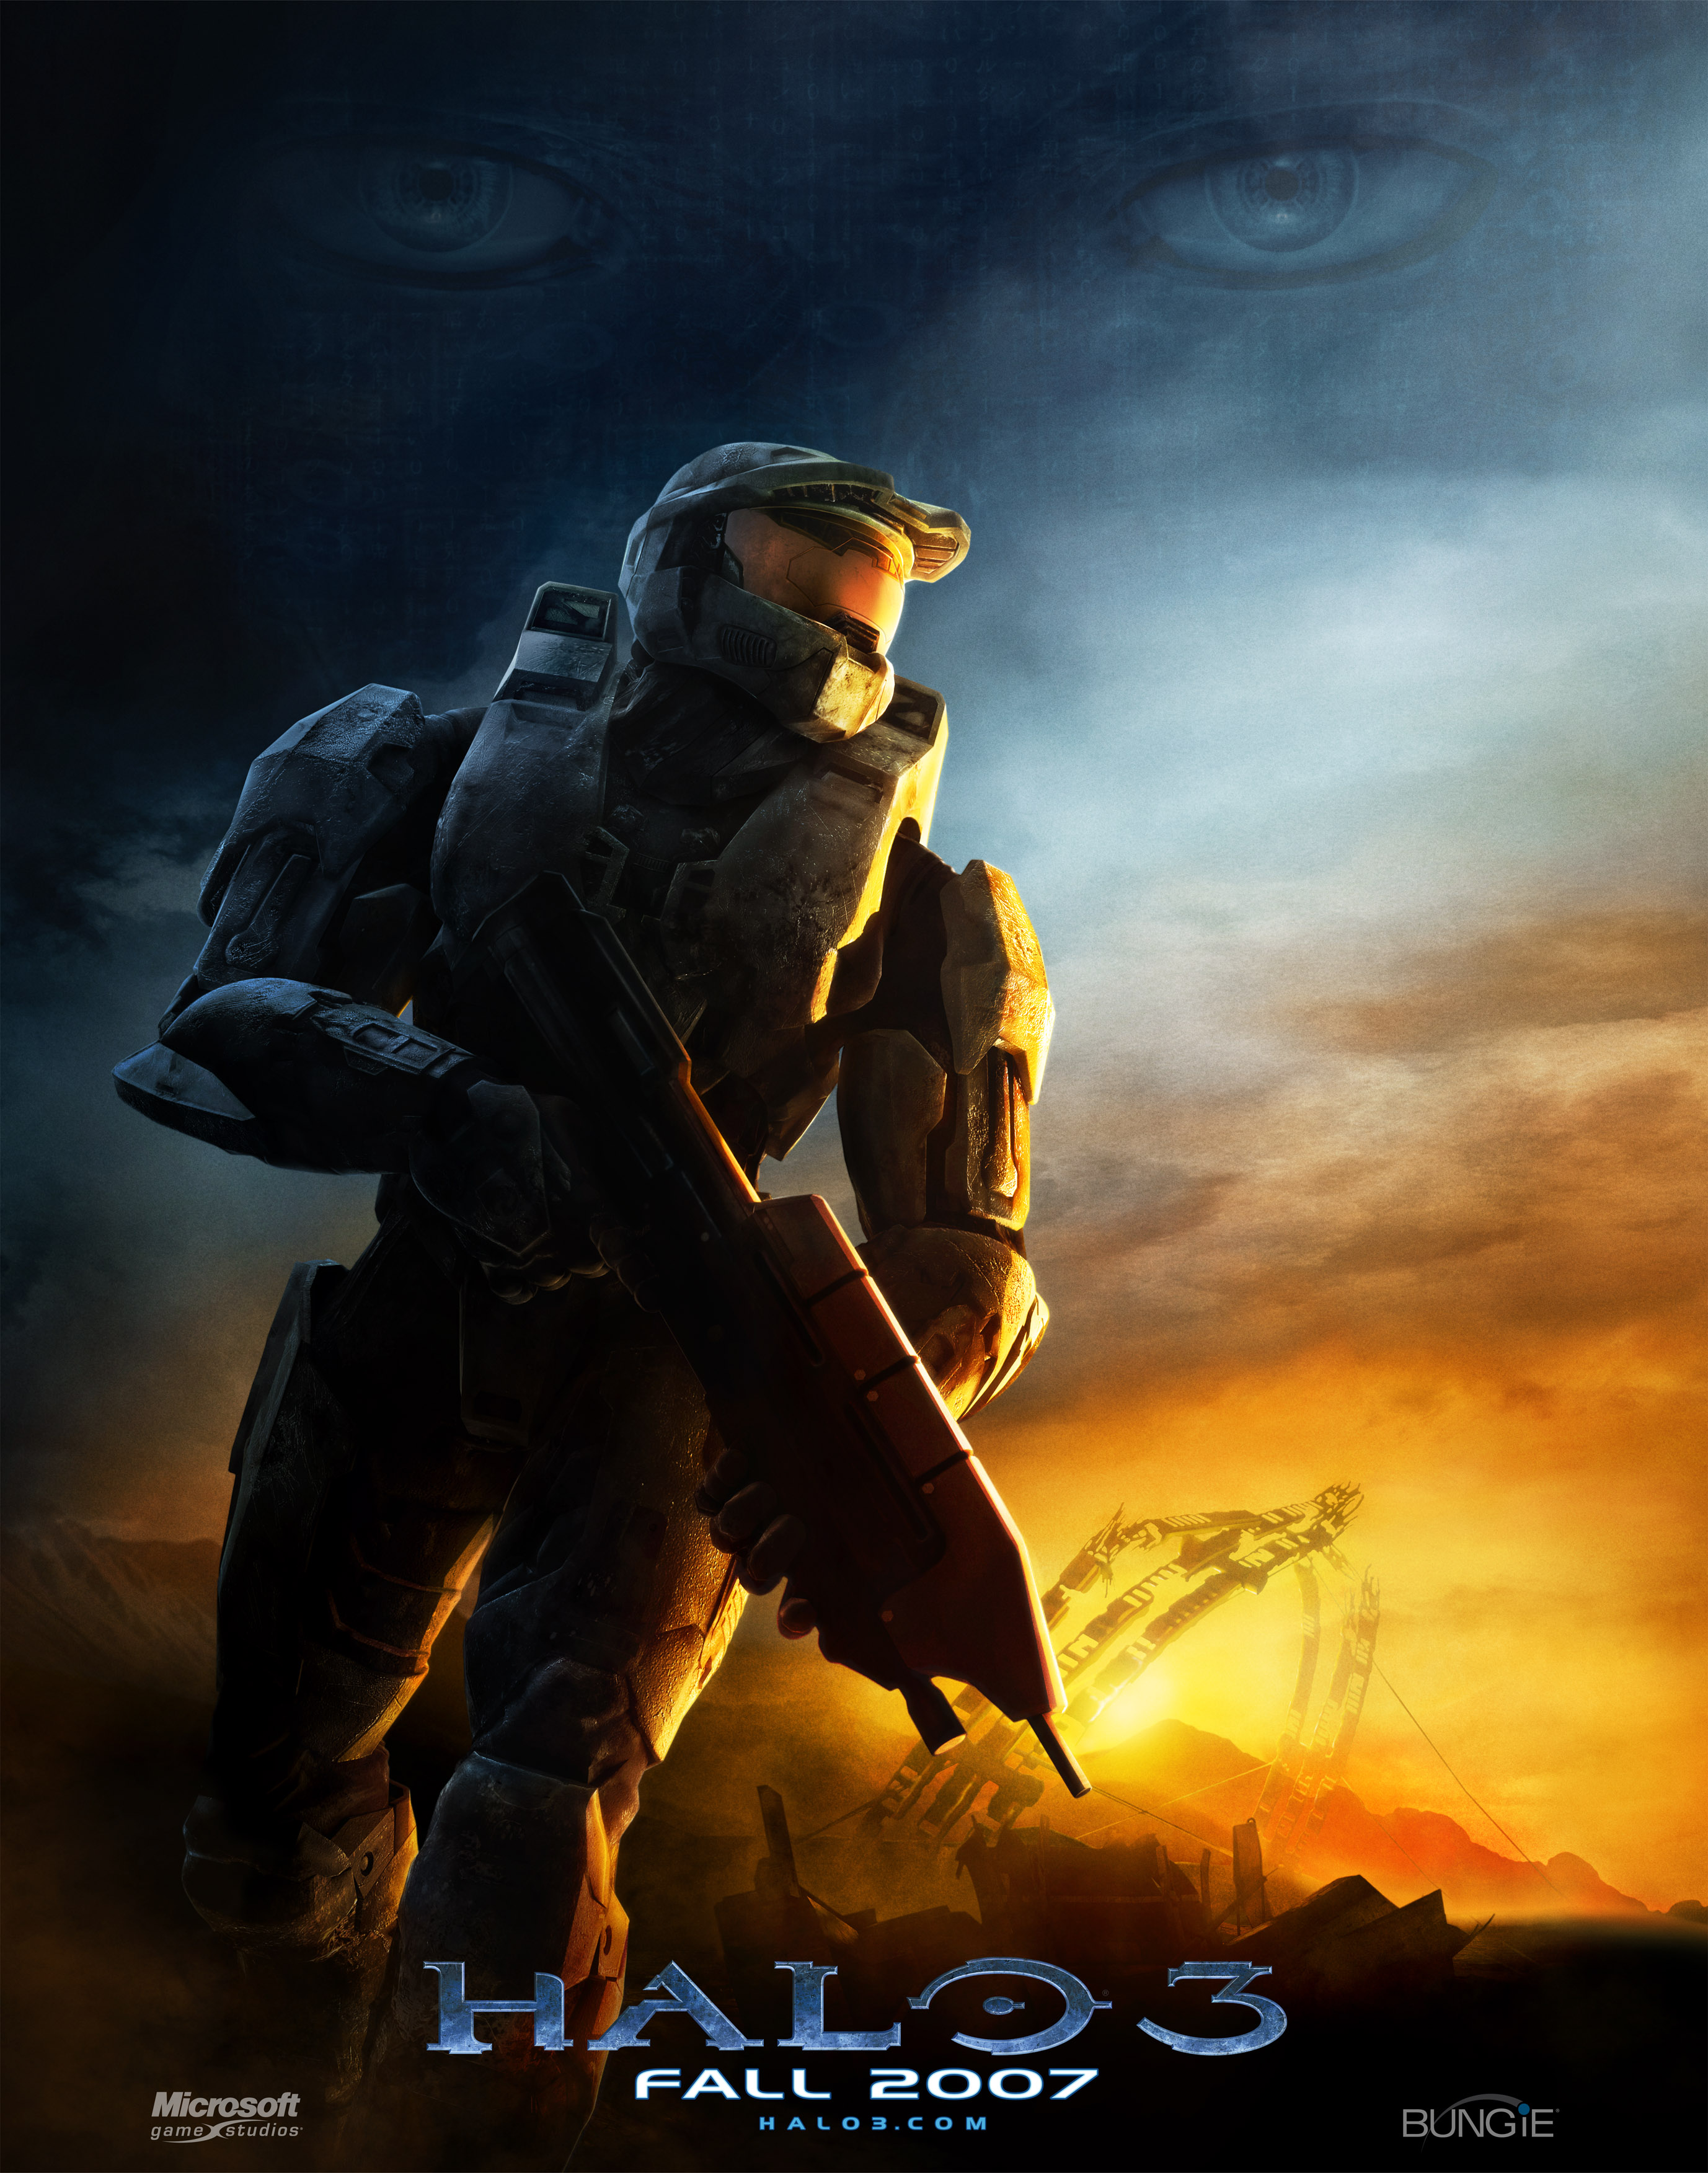 master chief wallpaper,action adventure game,movie,poster,action film,cg artwork